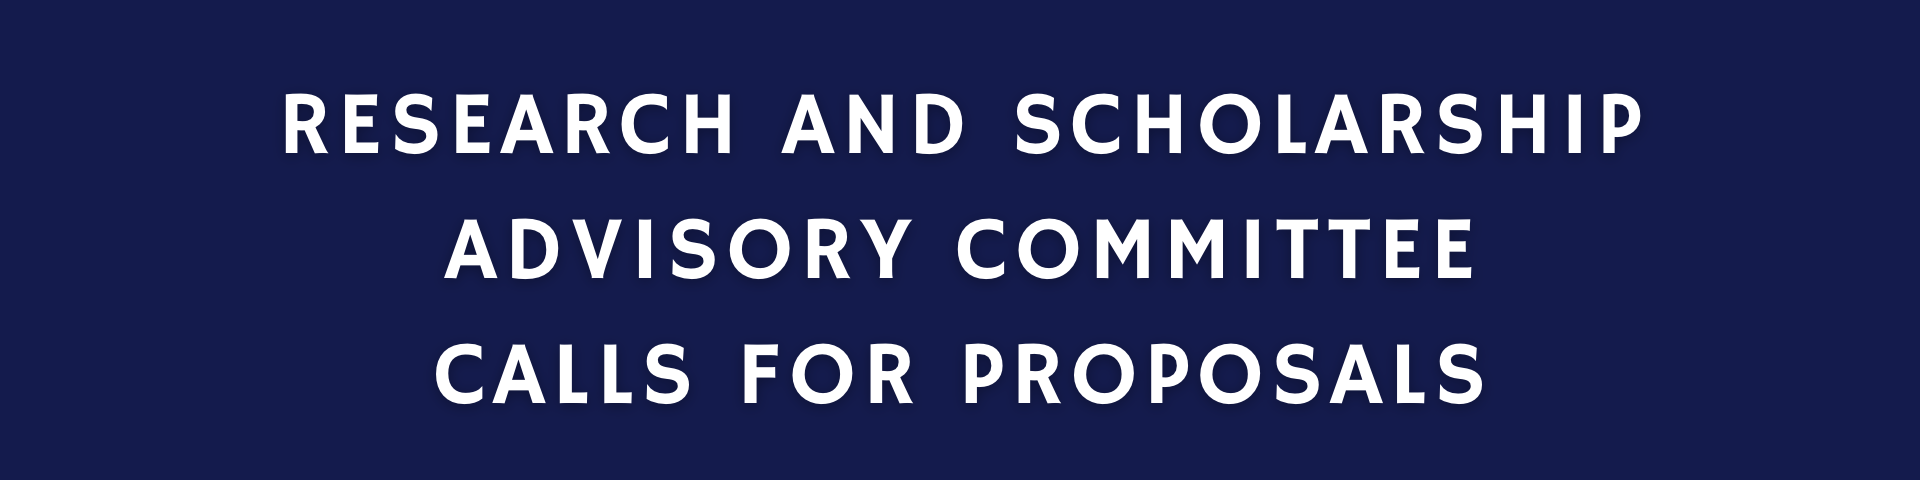 Blue banner with white text reading Research and Scholarship Advisory Committee Calls for Proposals 